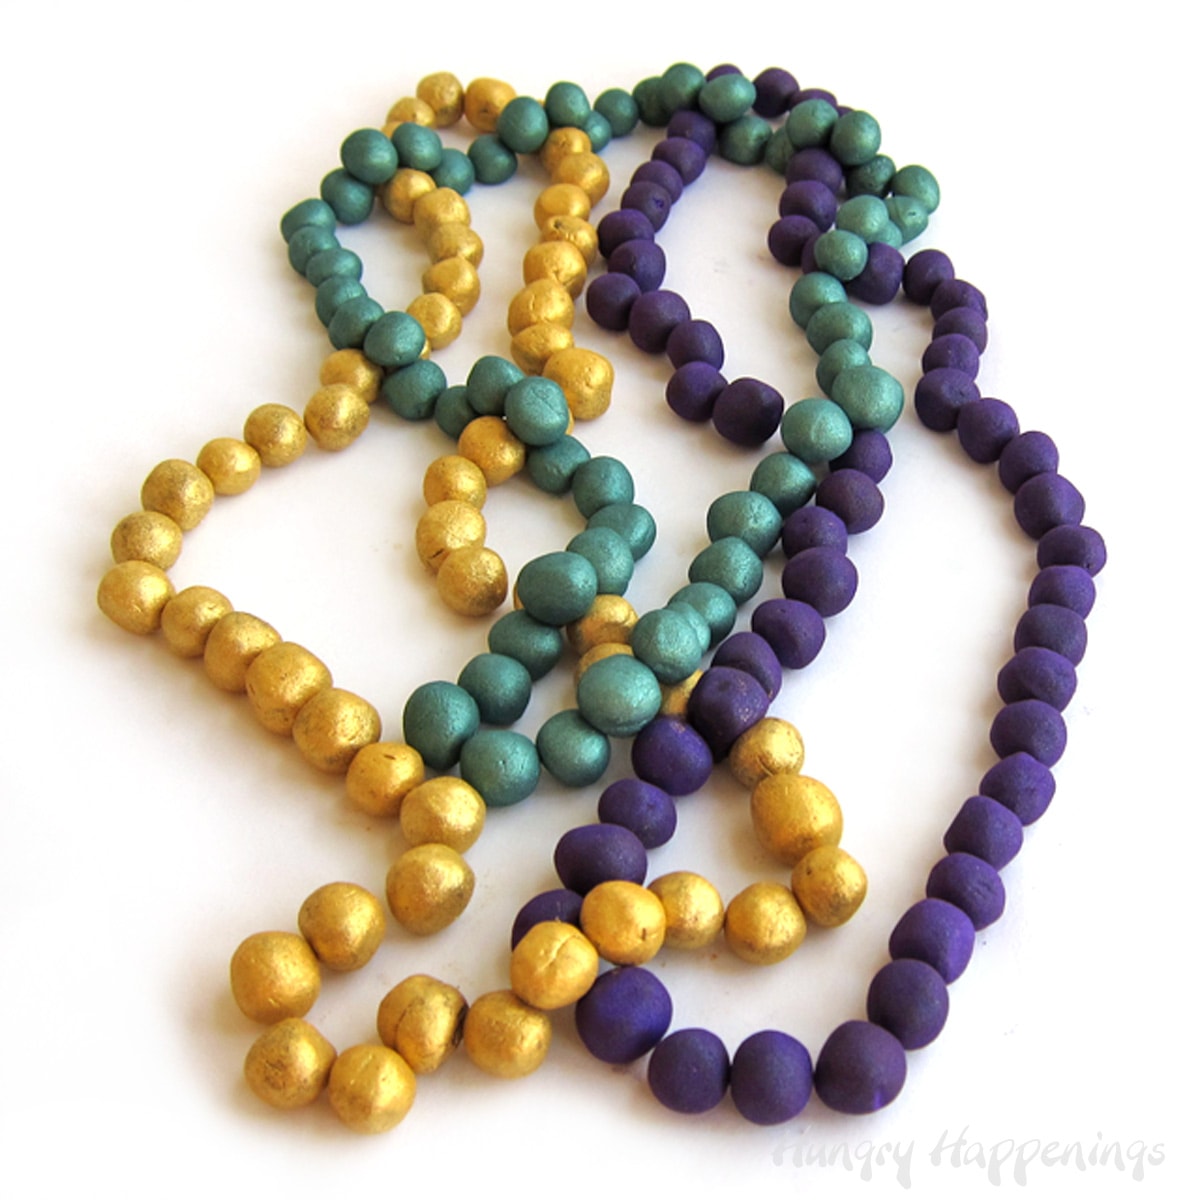 chocolate Mardi Gras beads dusted in gold, purple, and green